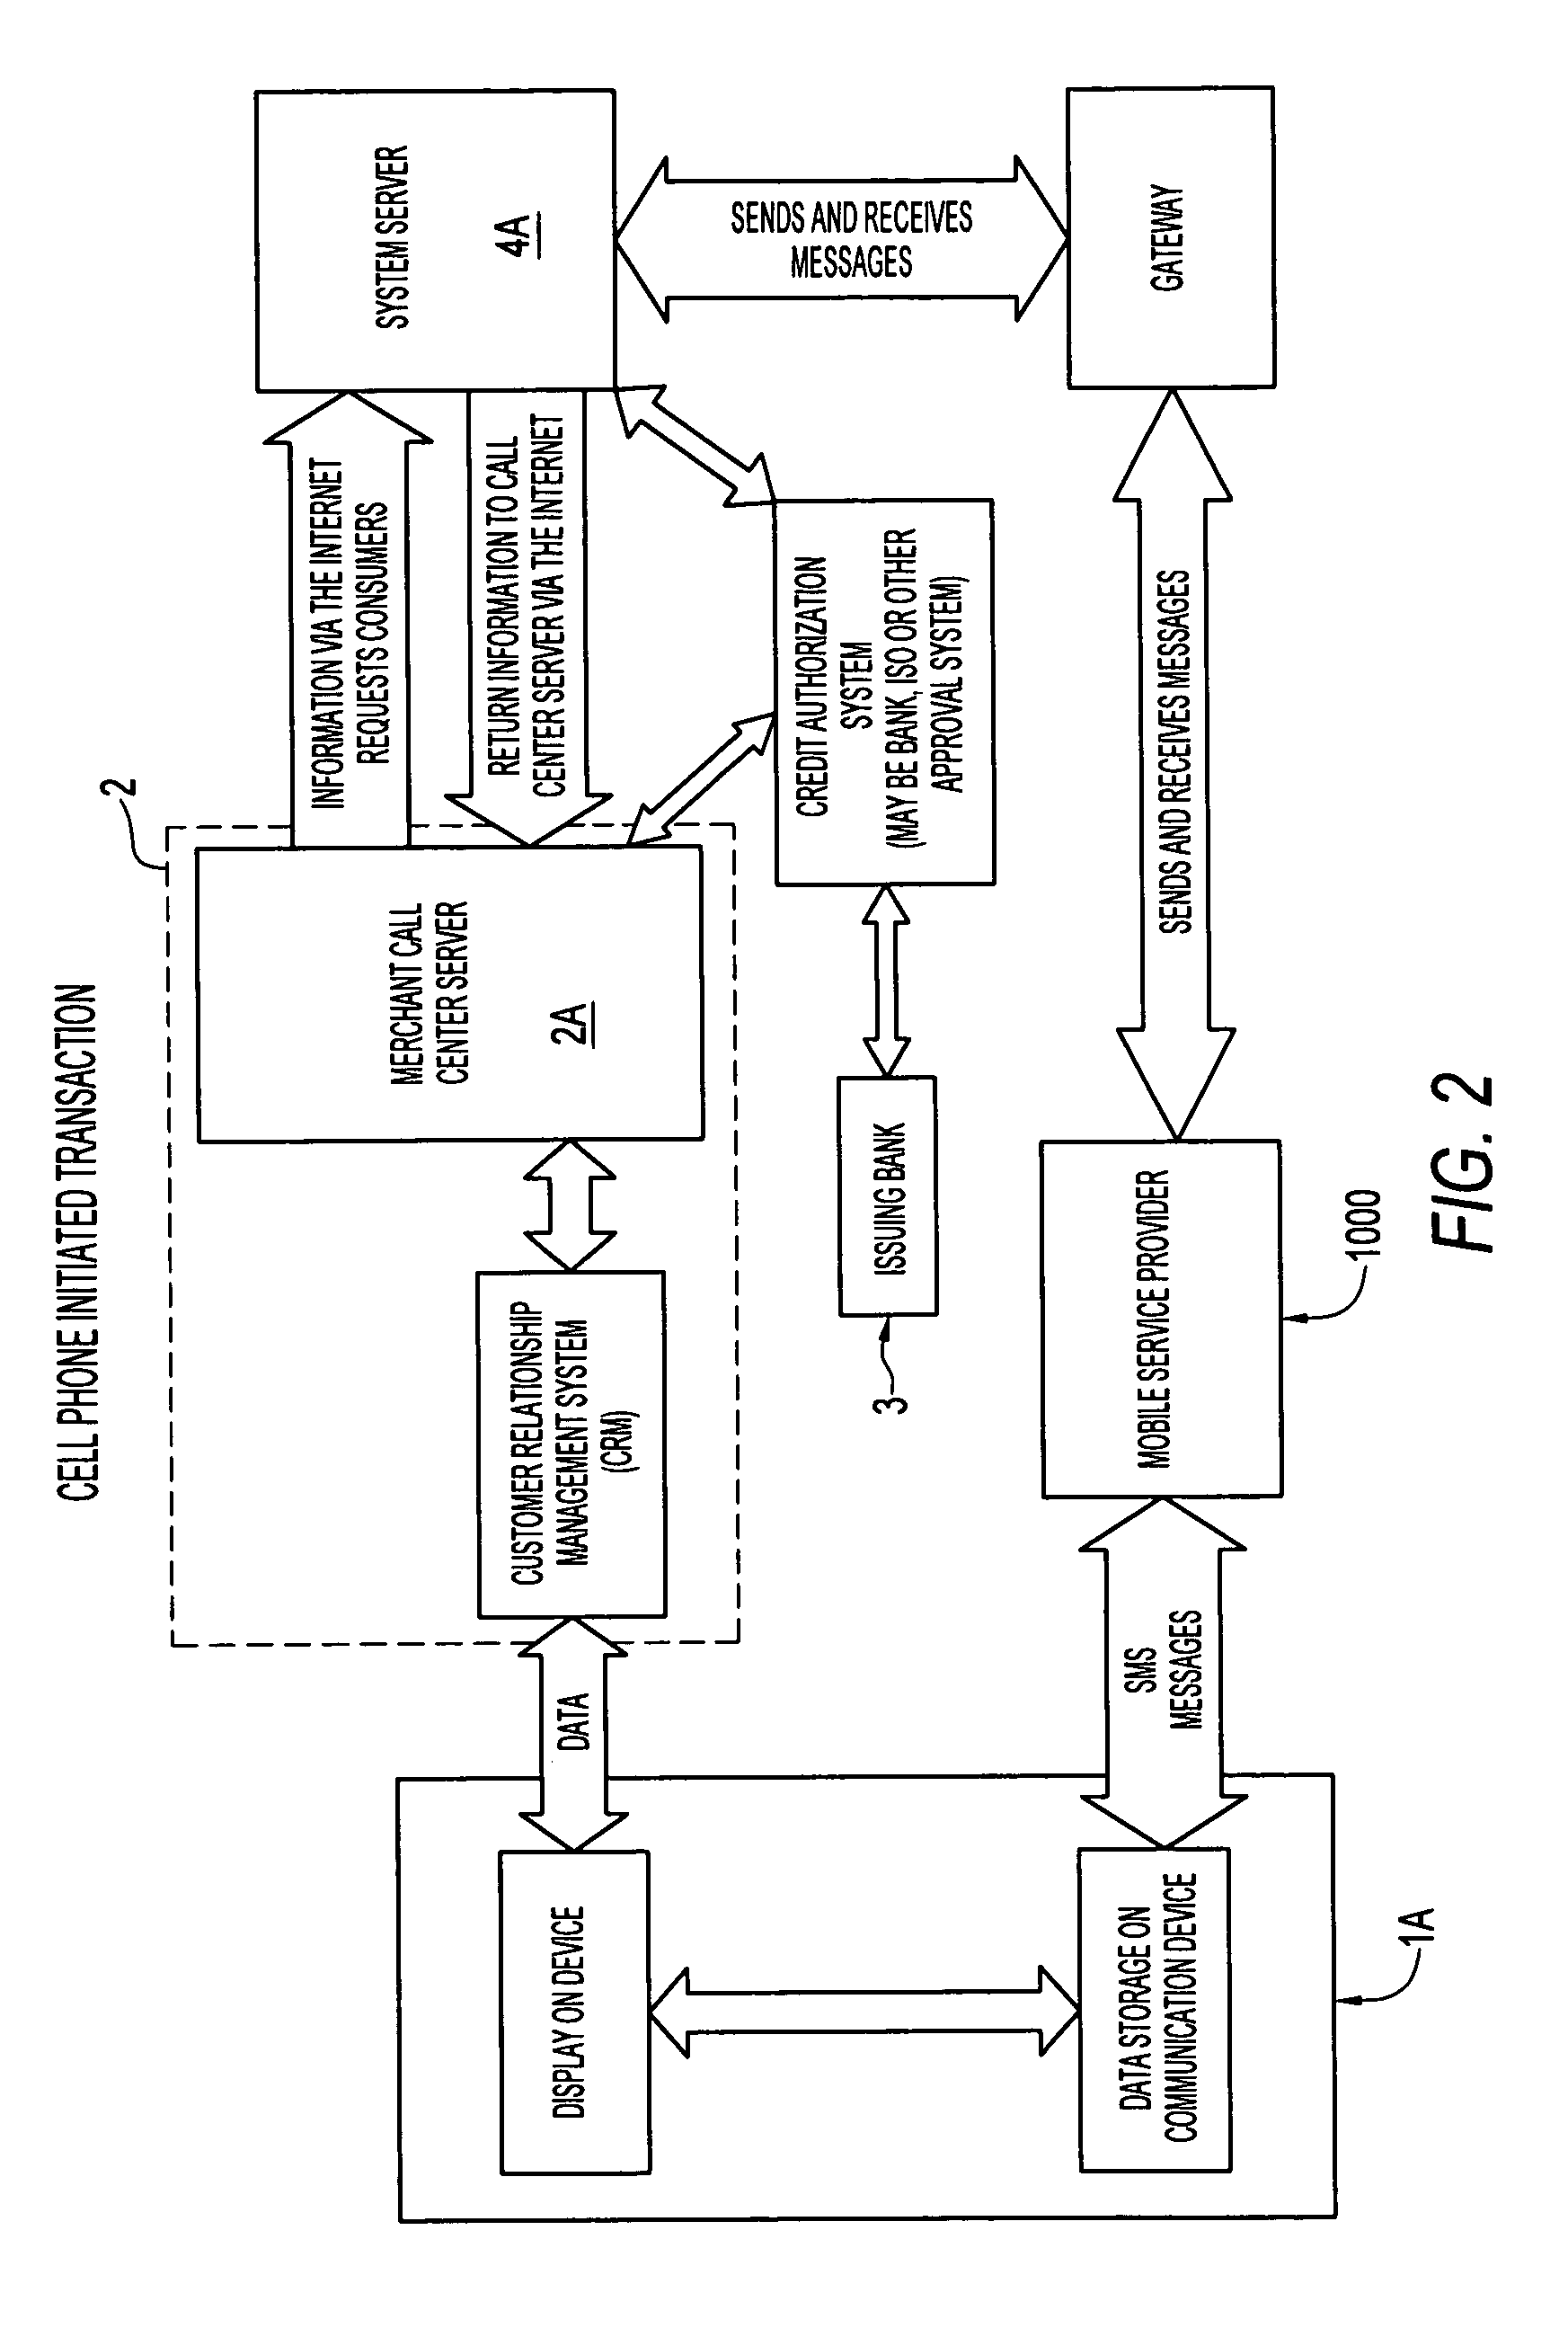 Method for electronic payment